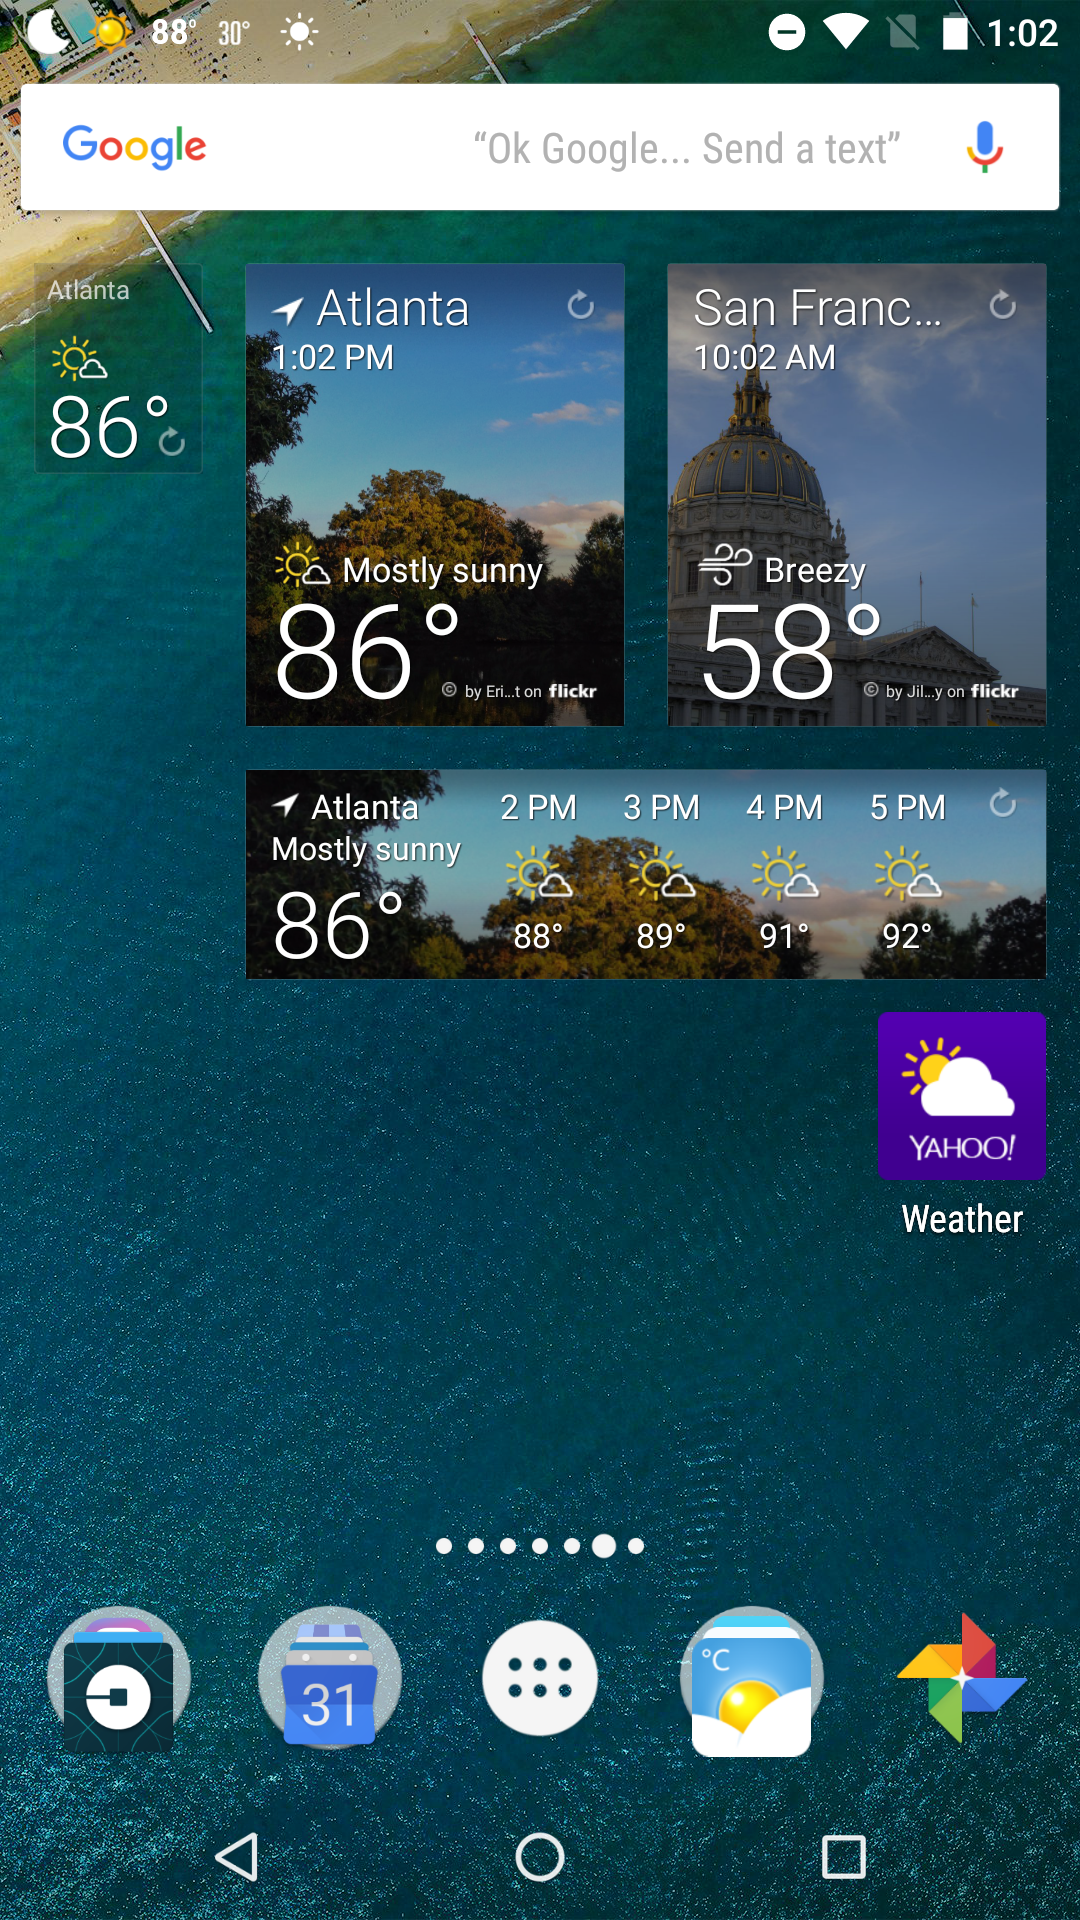 android_yahoo-weather-widget-160712.png